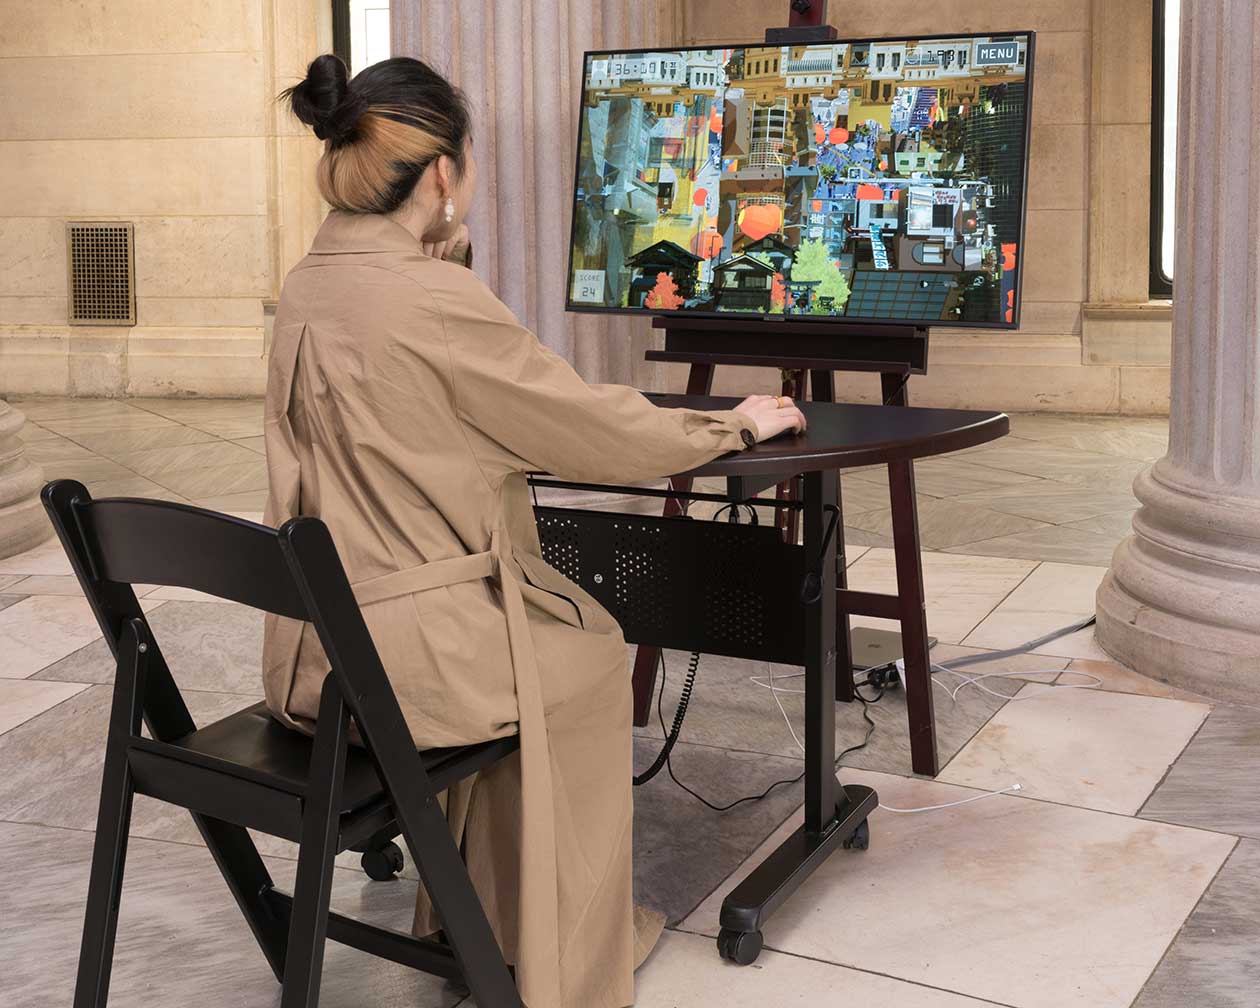 Person seated at desk with keyboard and mouse in front of screen on easel, with the game on the screen